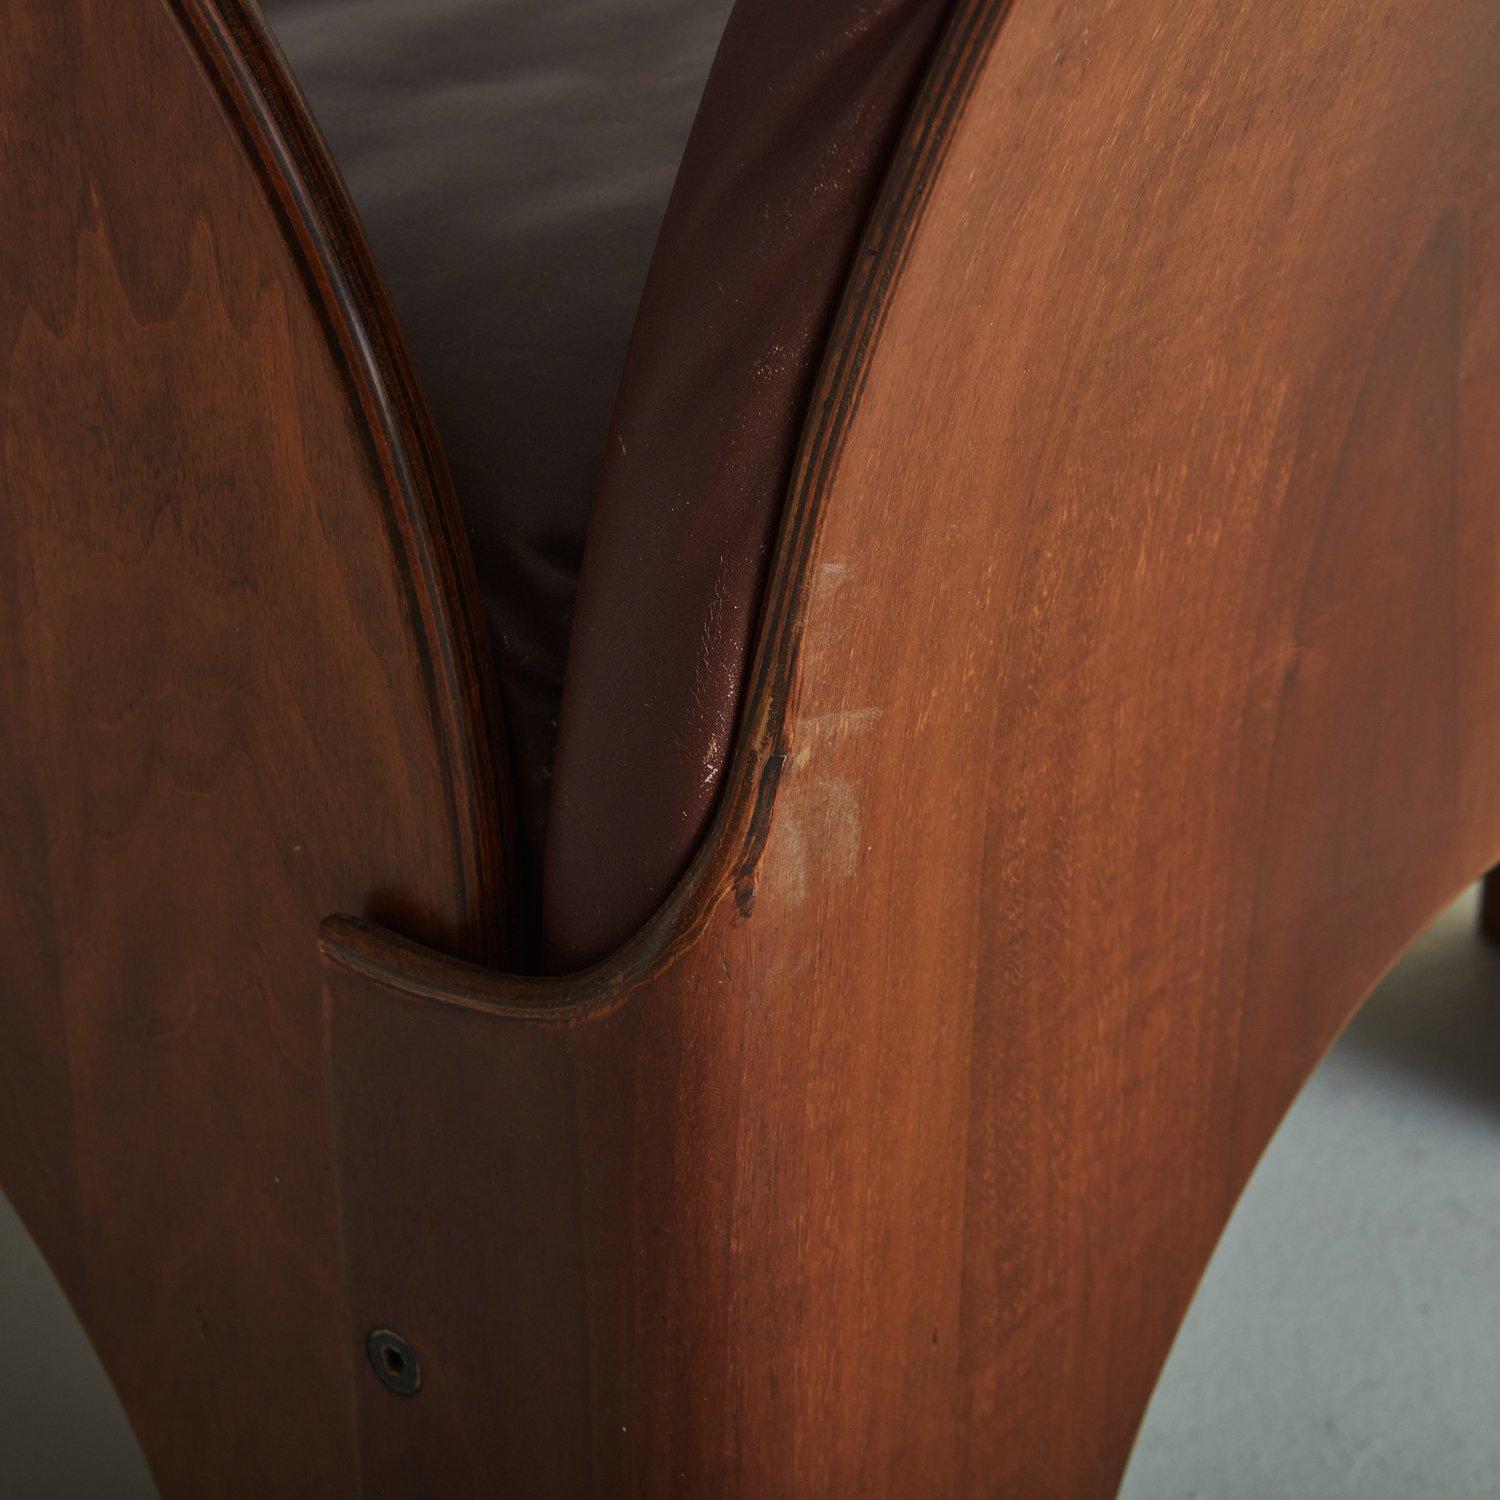 Walnut + Leather 'Arcata' Chair by Gae Aulenti for Poltronova, Italy 1968 For Sale 5